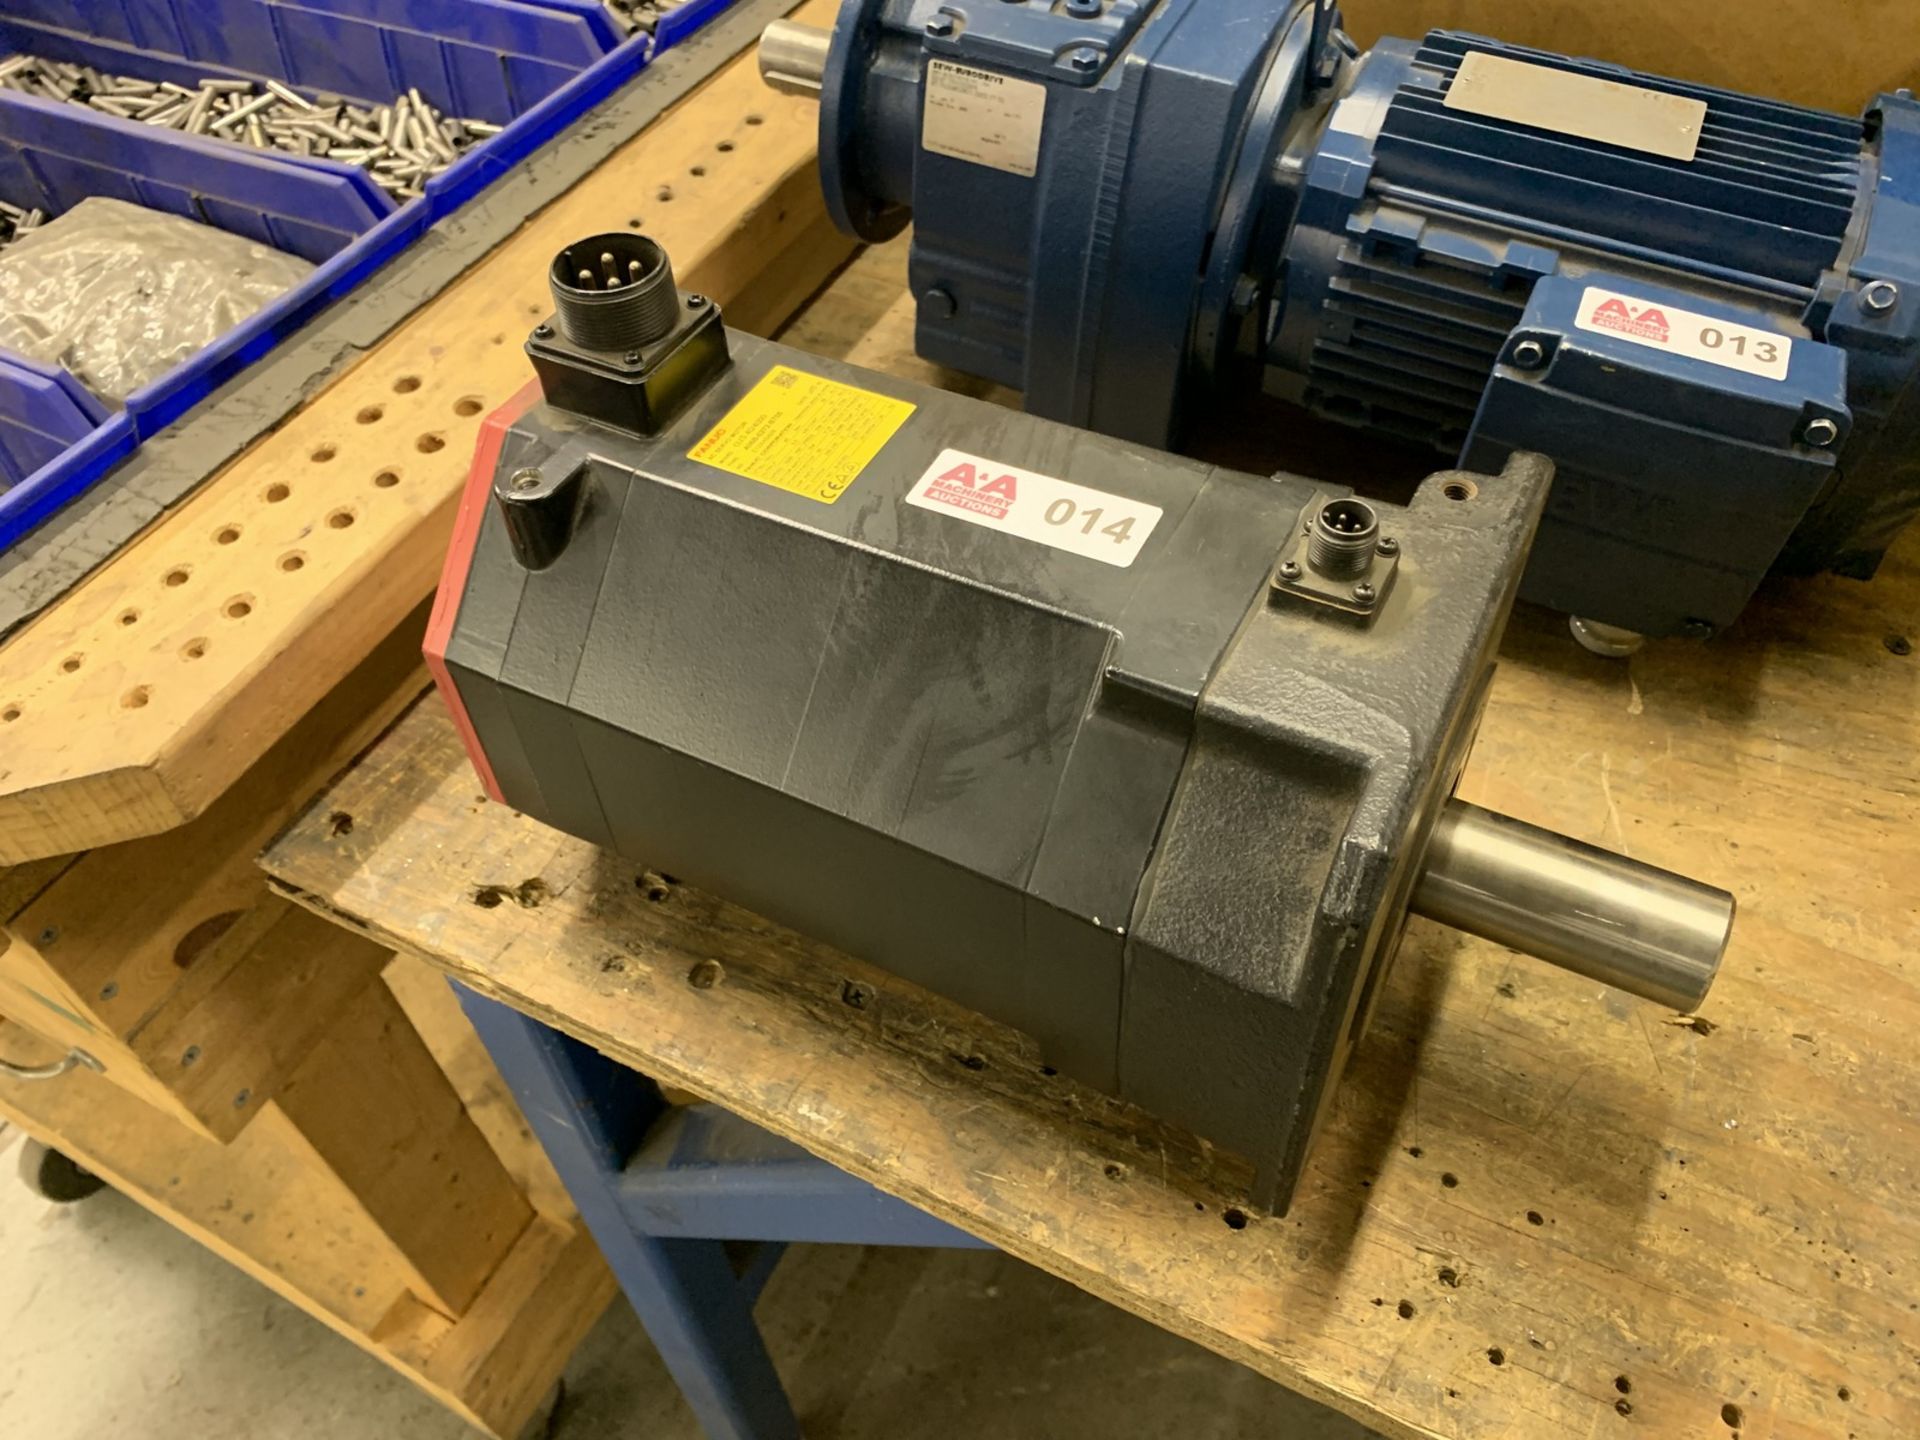 Fanuc Mdl. ais40/4000 AC Servo Motor (All Items MUST be Removed by Thursday, December 19, 2019.